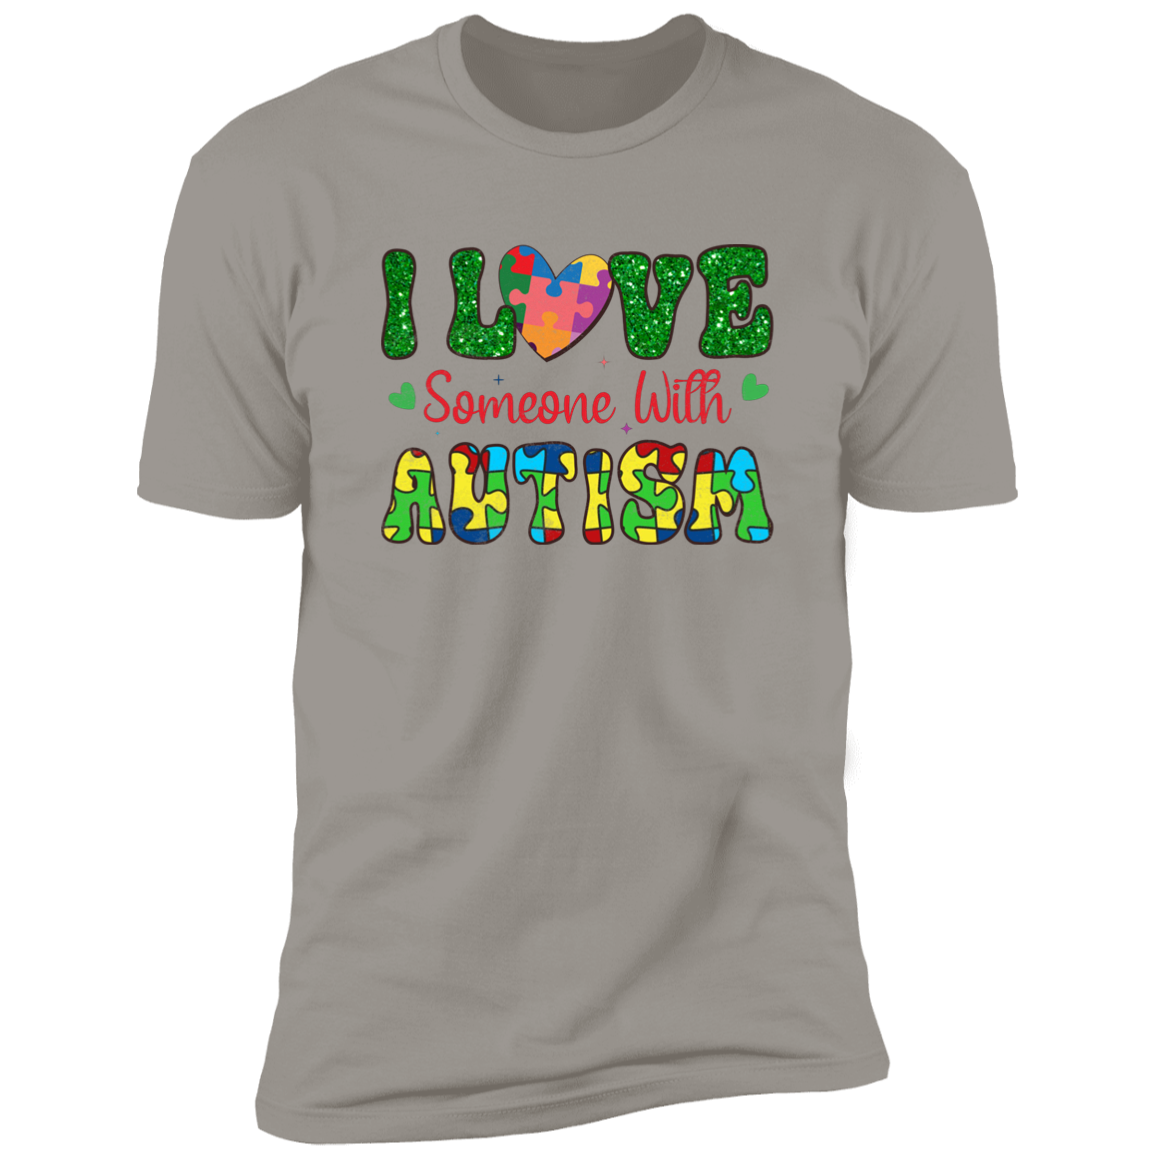 I Love Someone with Autism T-Shirt